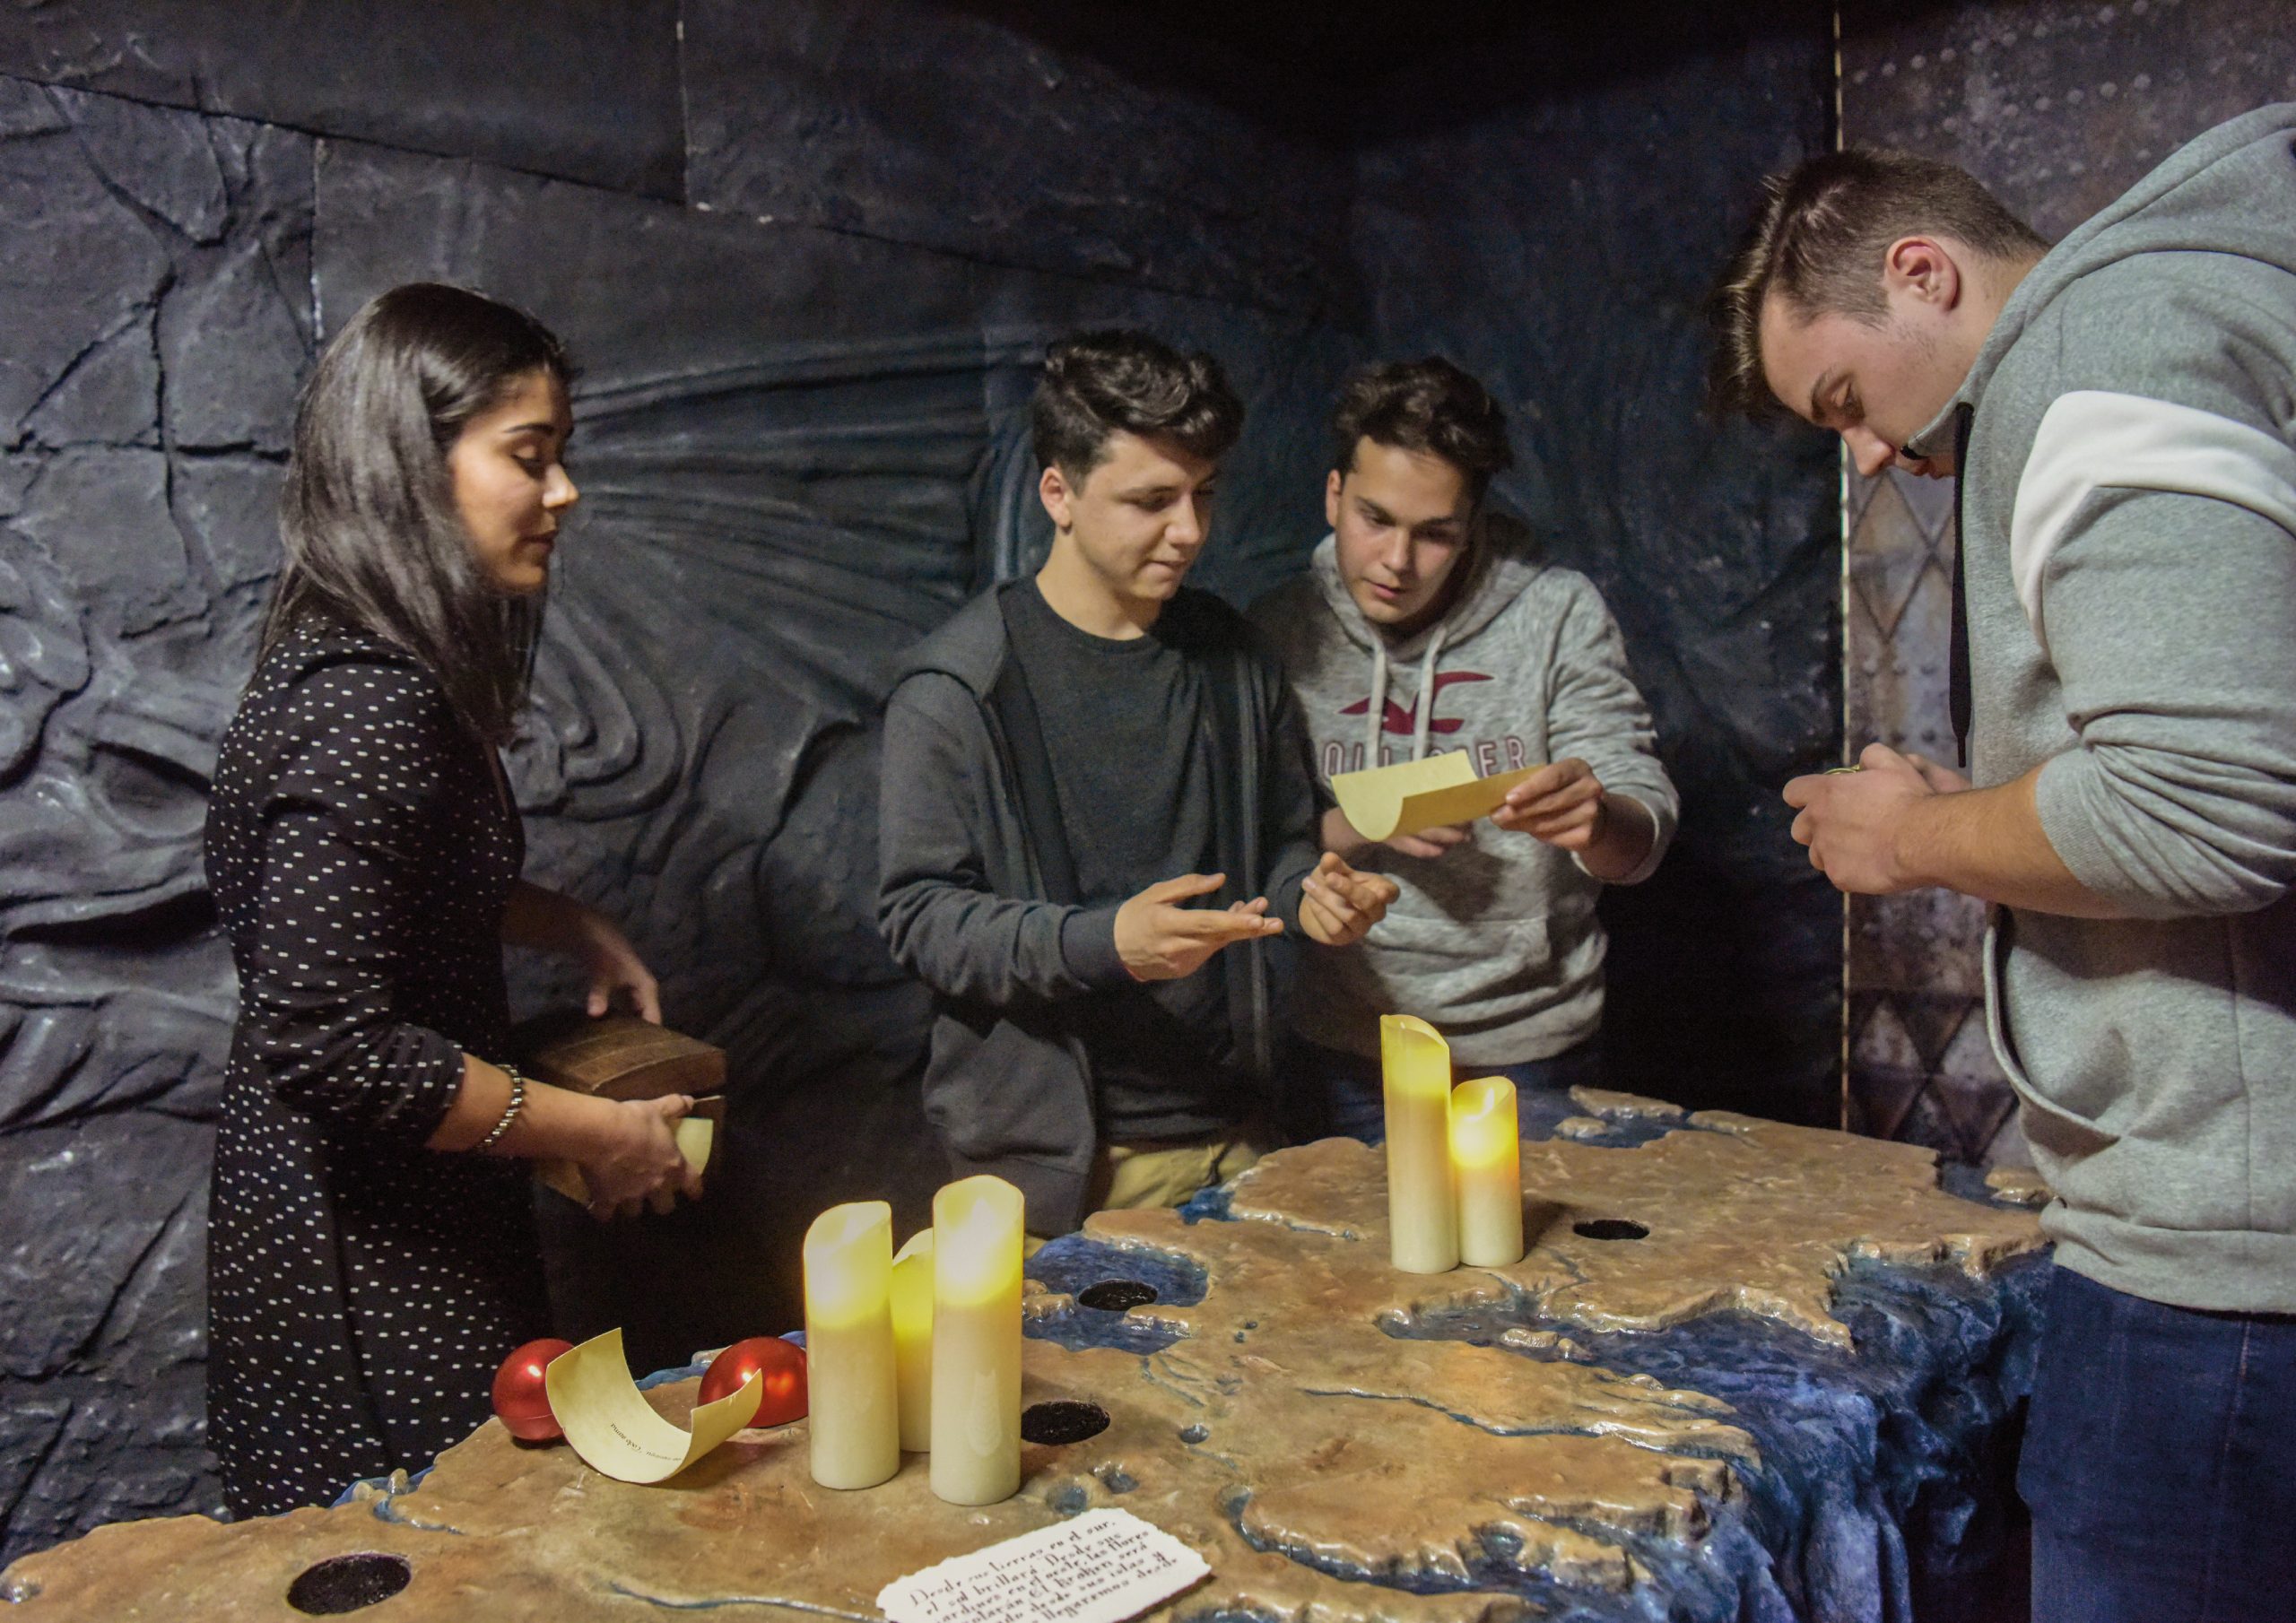 ESCAPE ROOMS ON TOUR – GAME OF THRONES